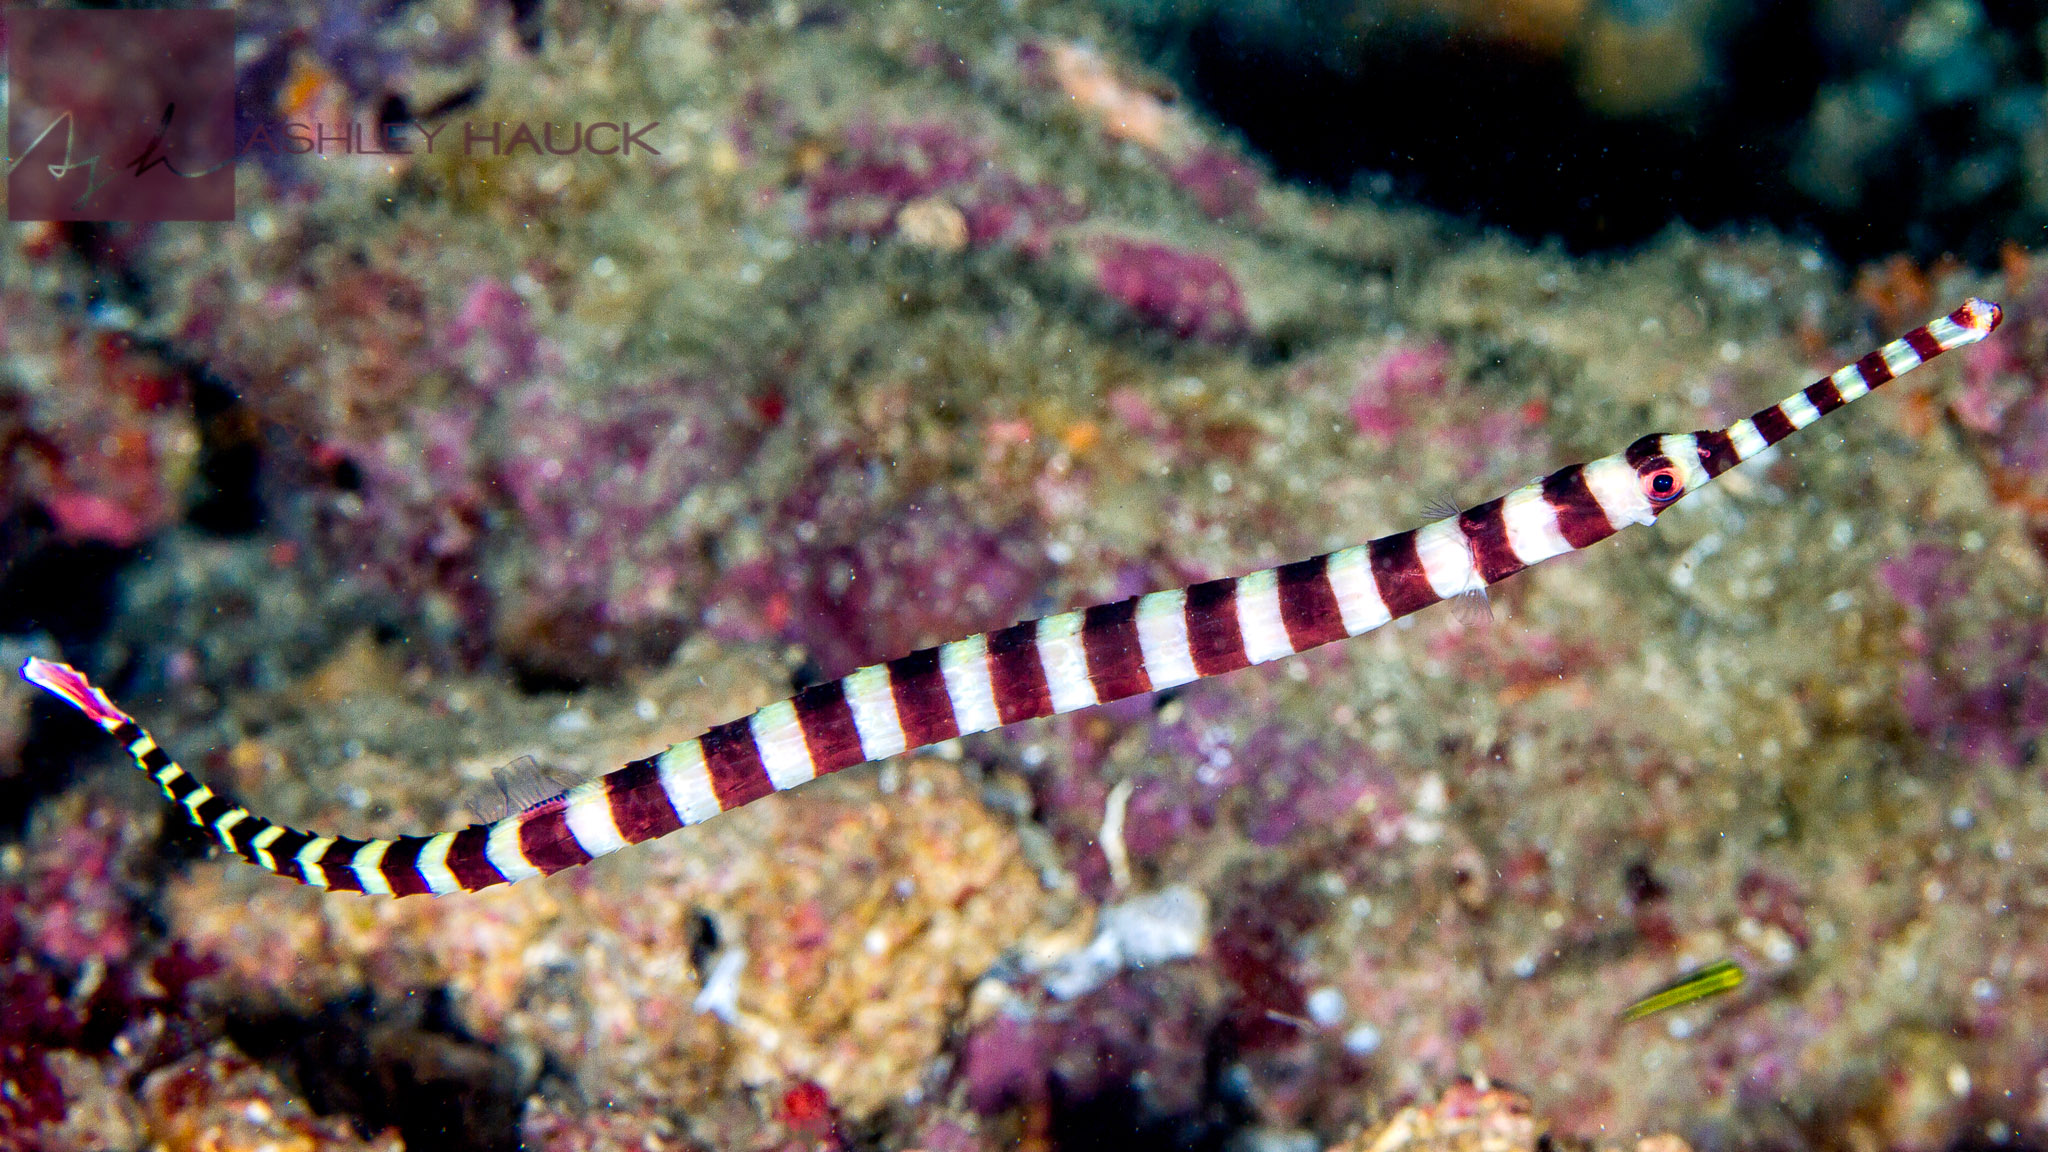 The Reproductive Habits of the Ghost Pipefish (A Limerick)